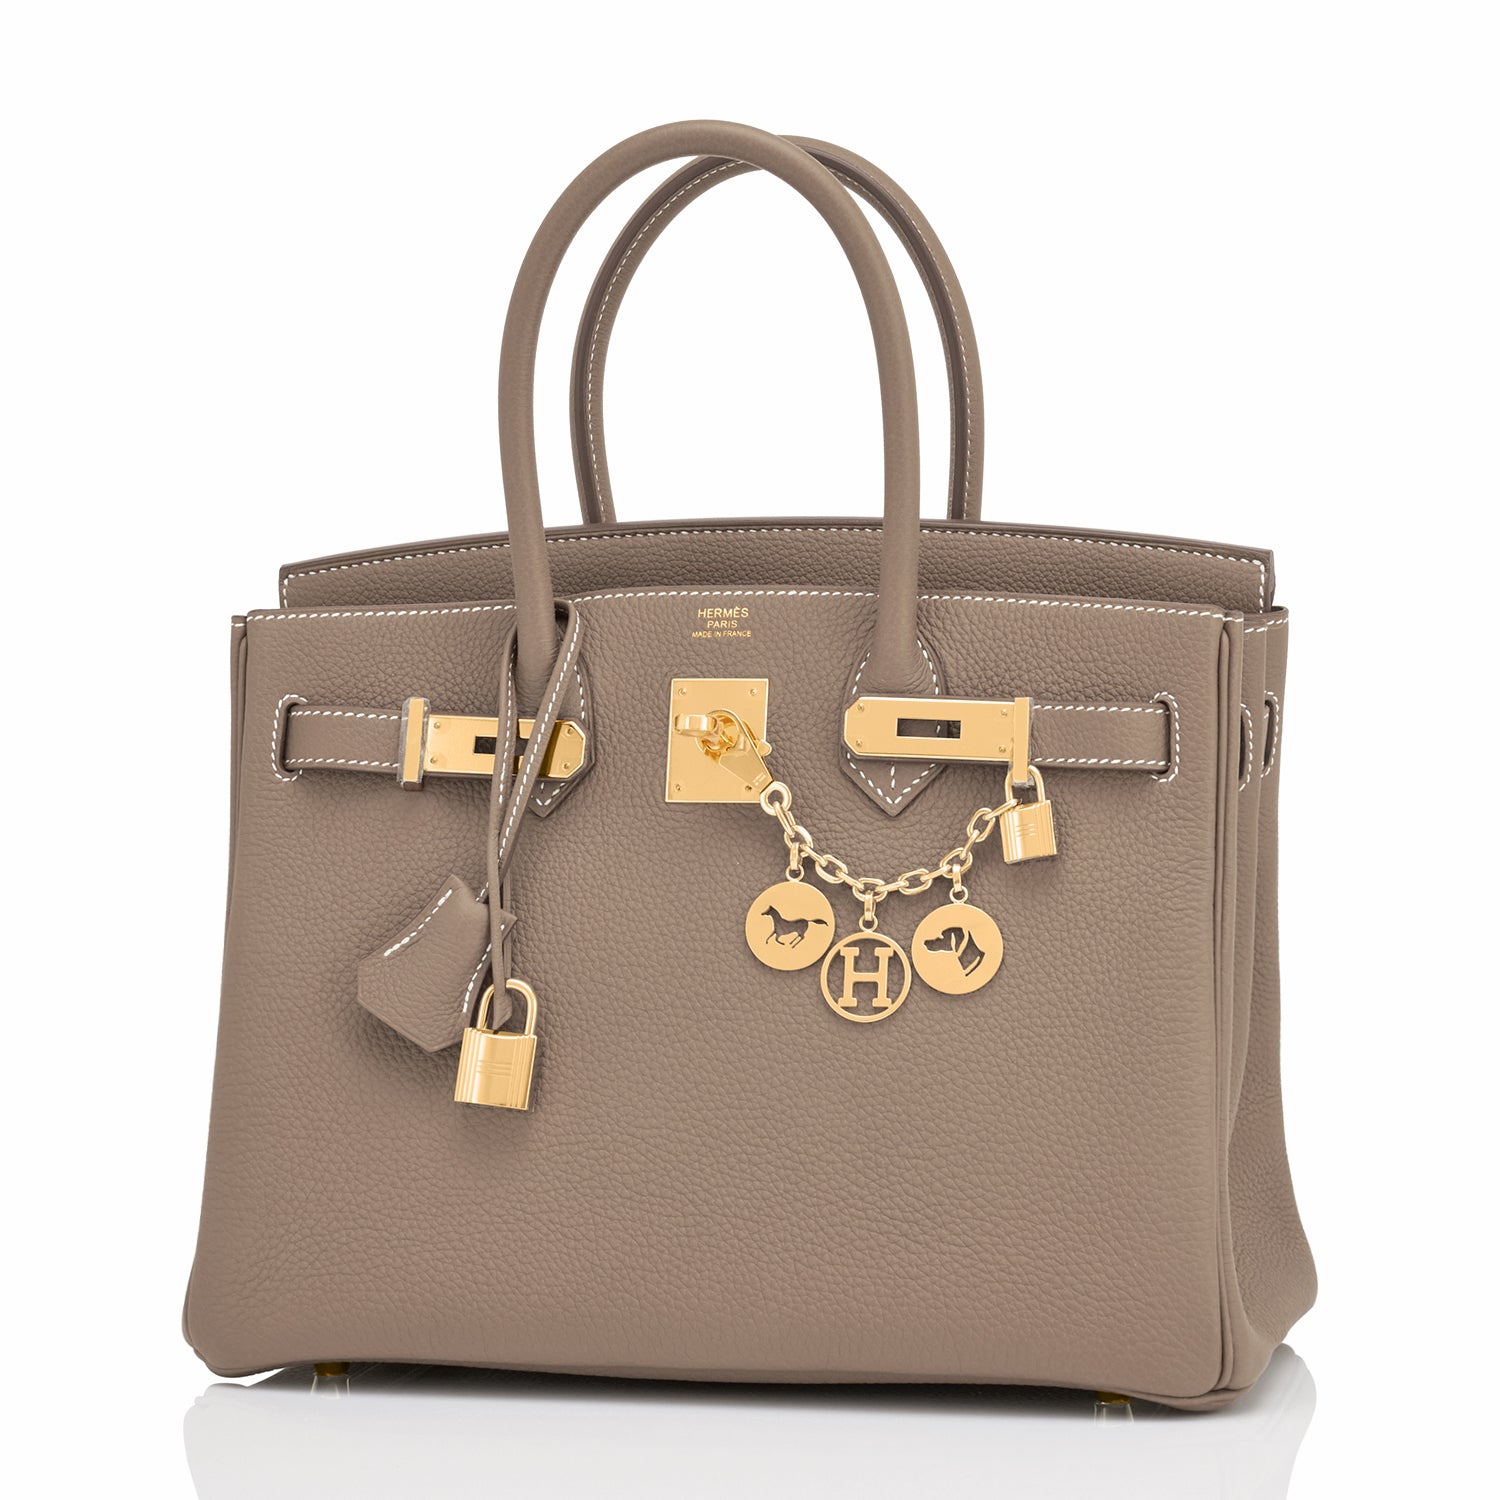 One of the most-coveted combination: Etoupe and Gold Hardware. In